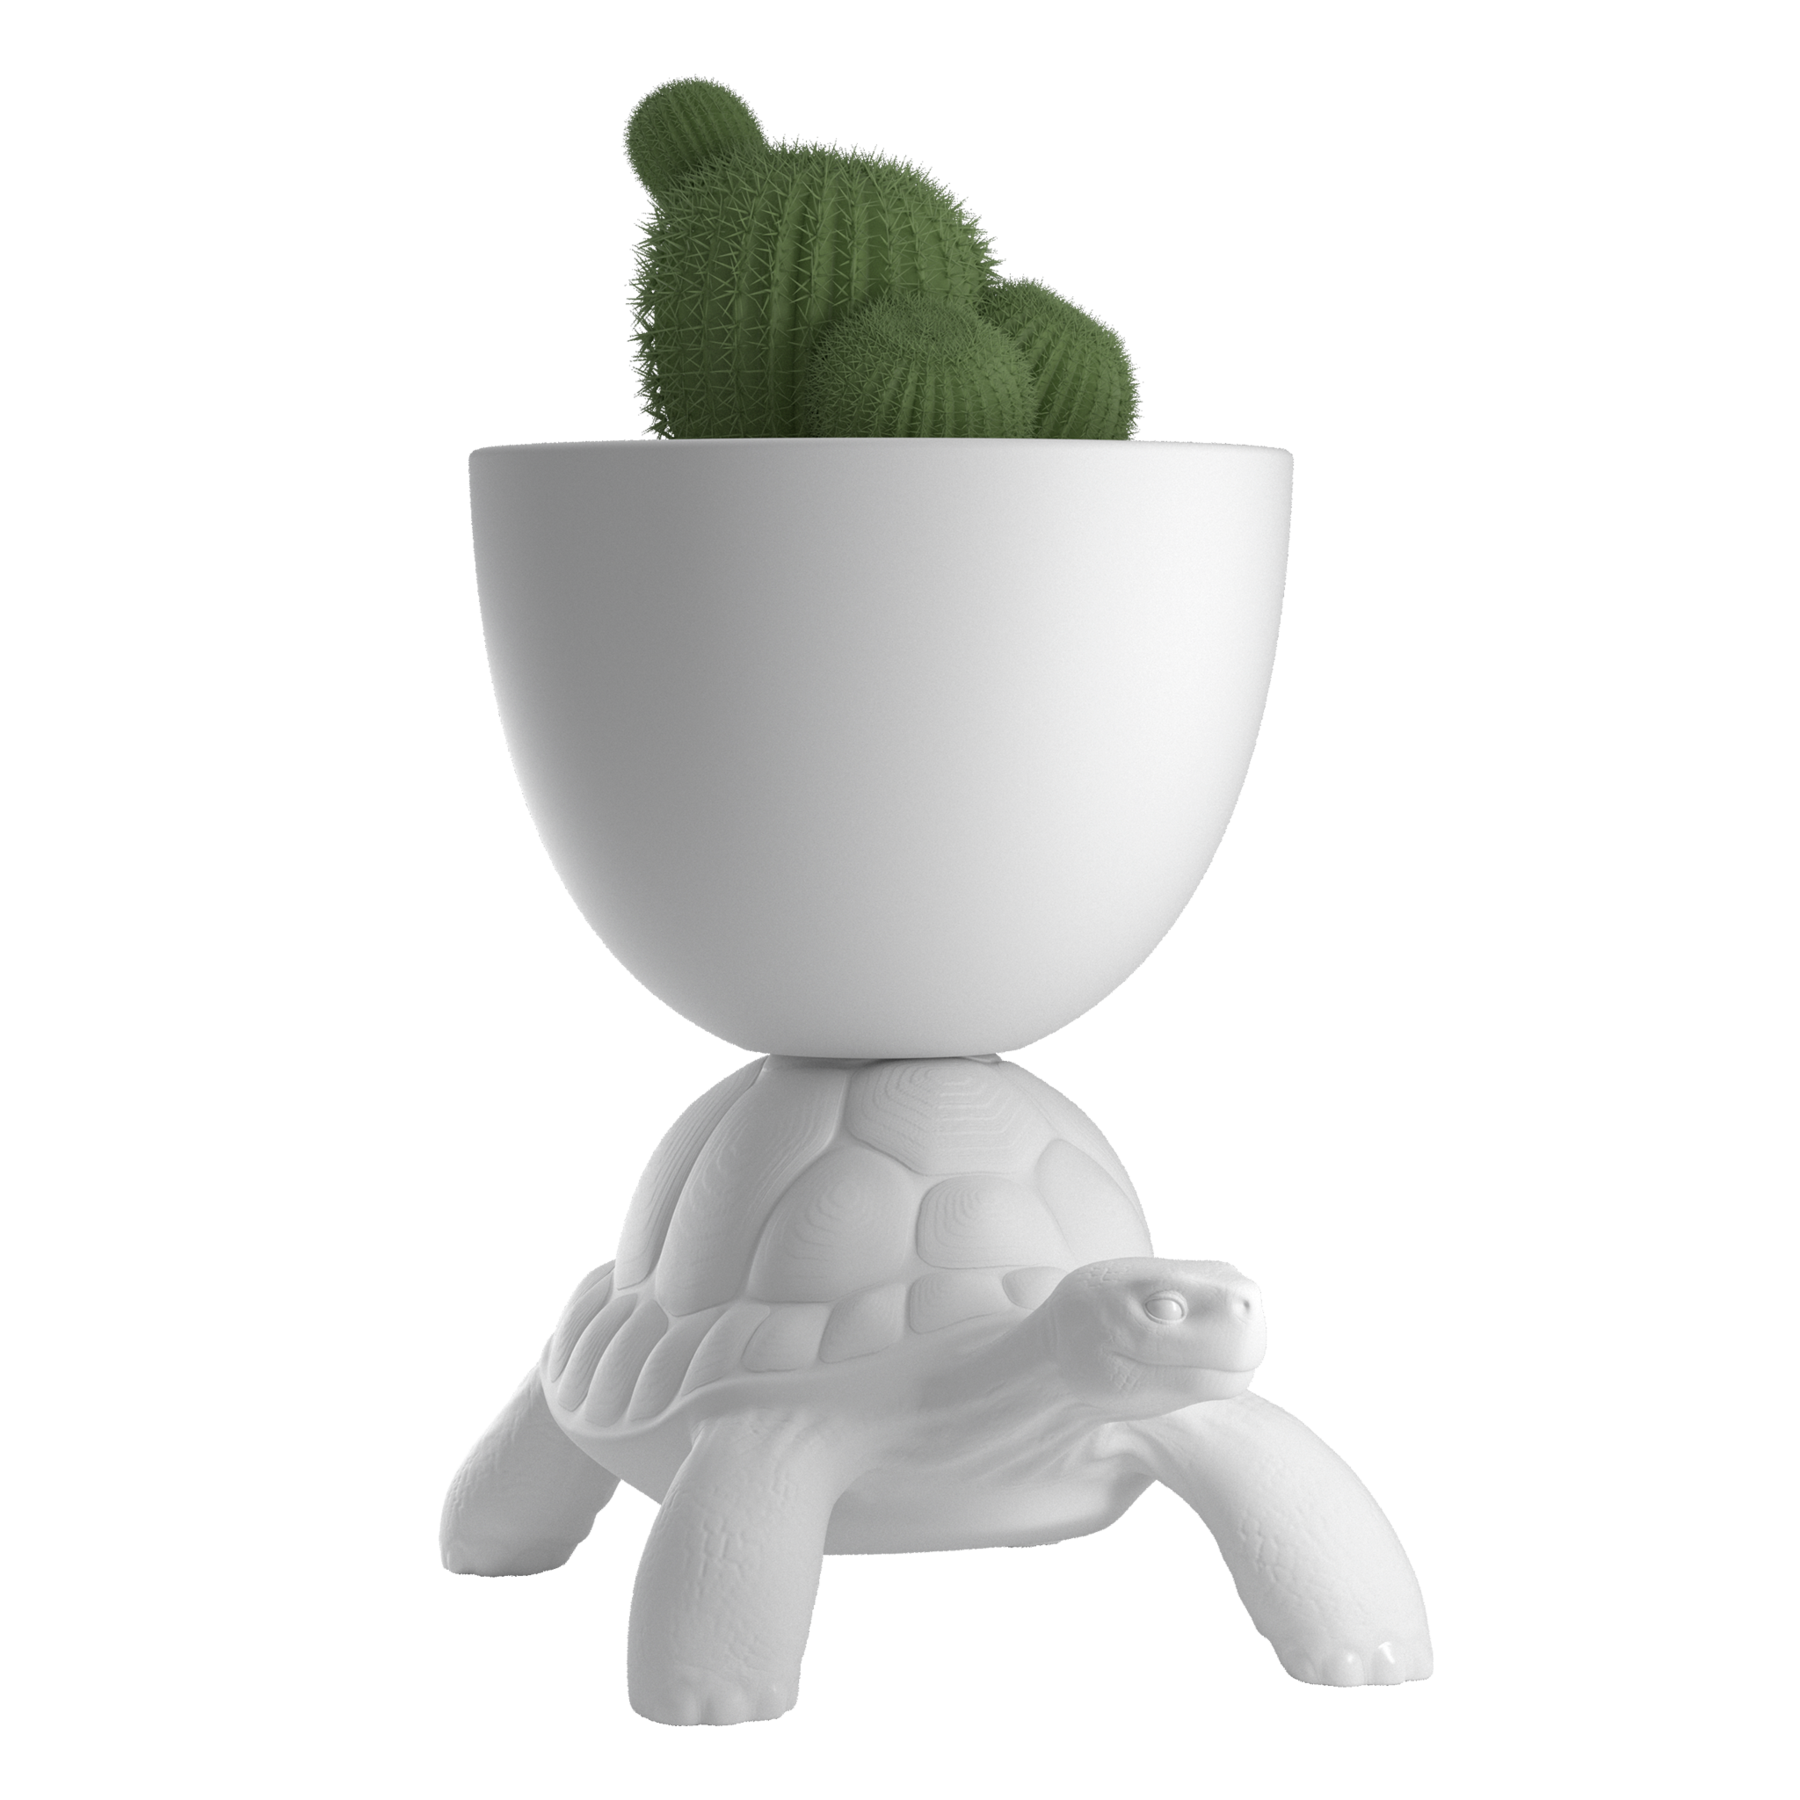 TURTLE CARRY planter - champagne cooler